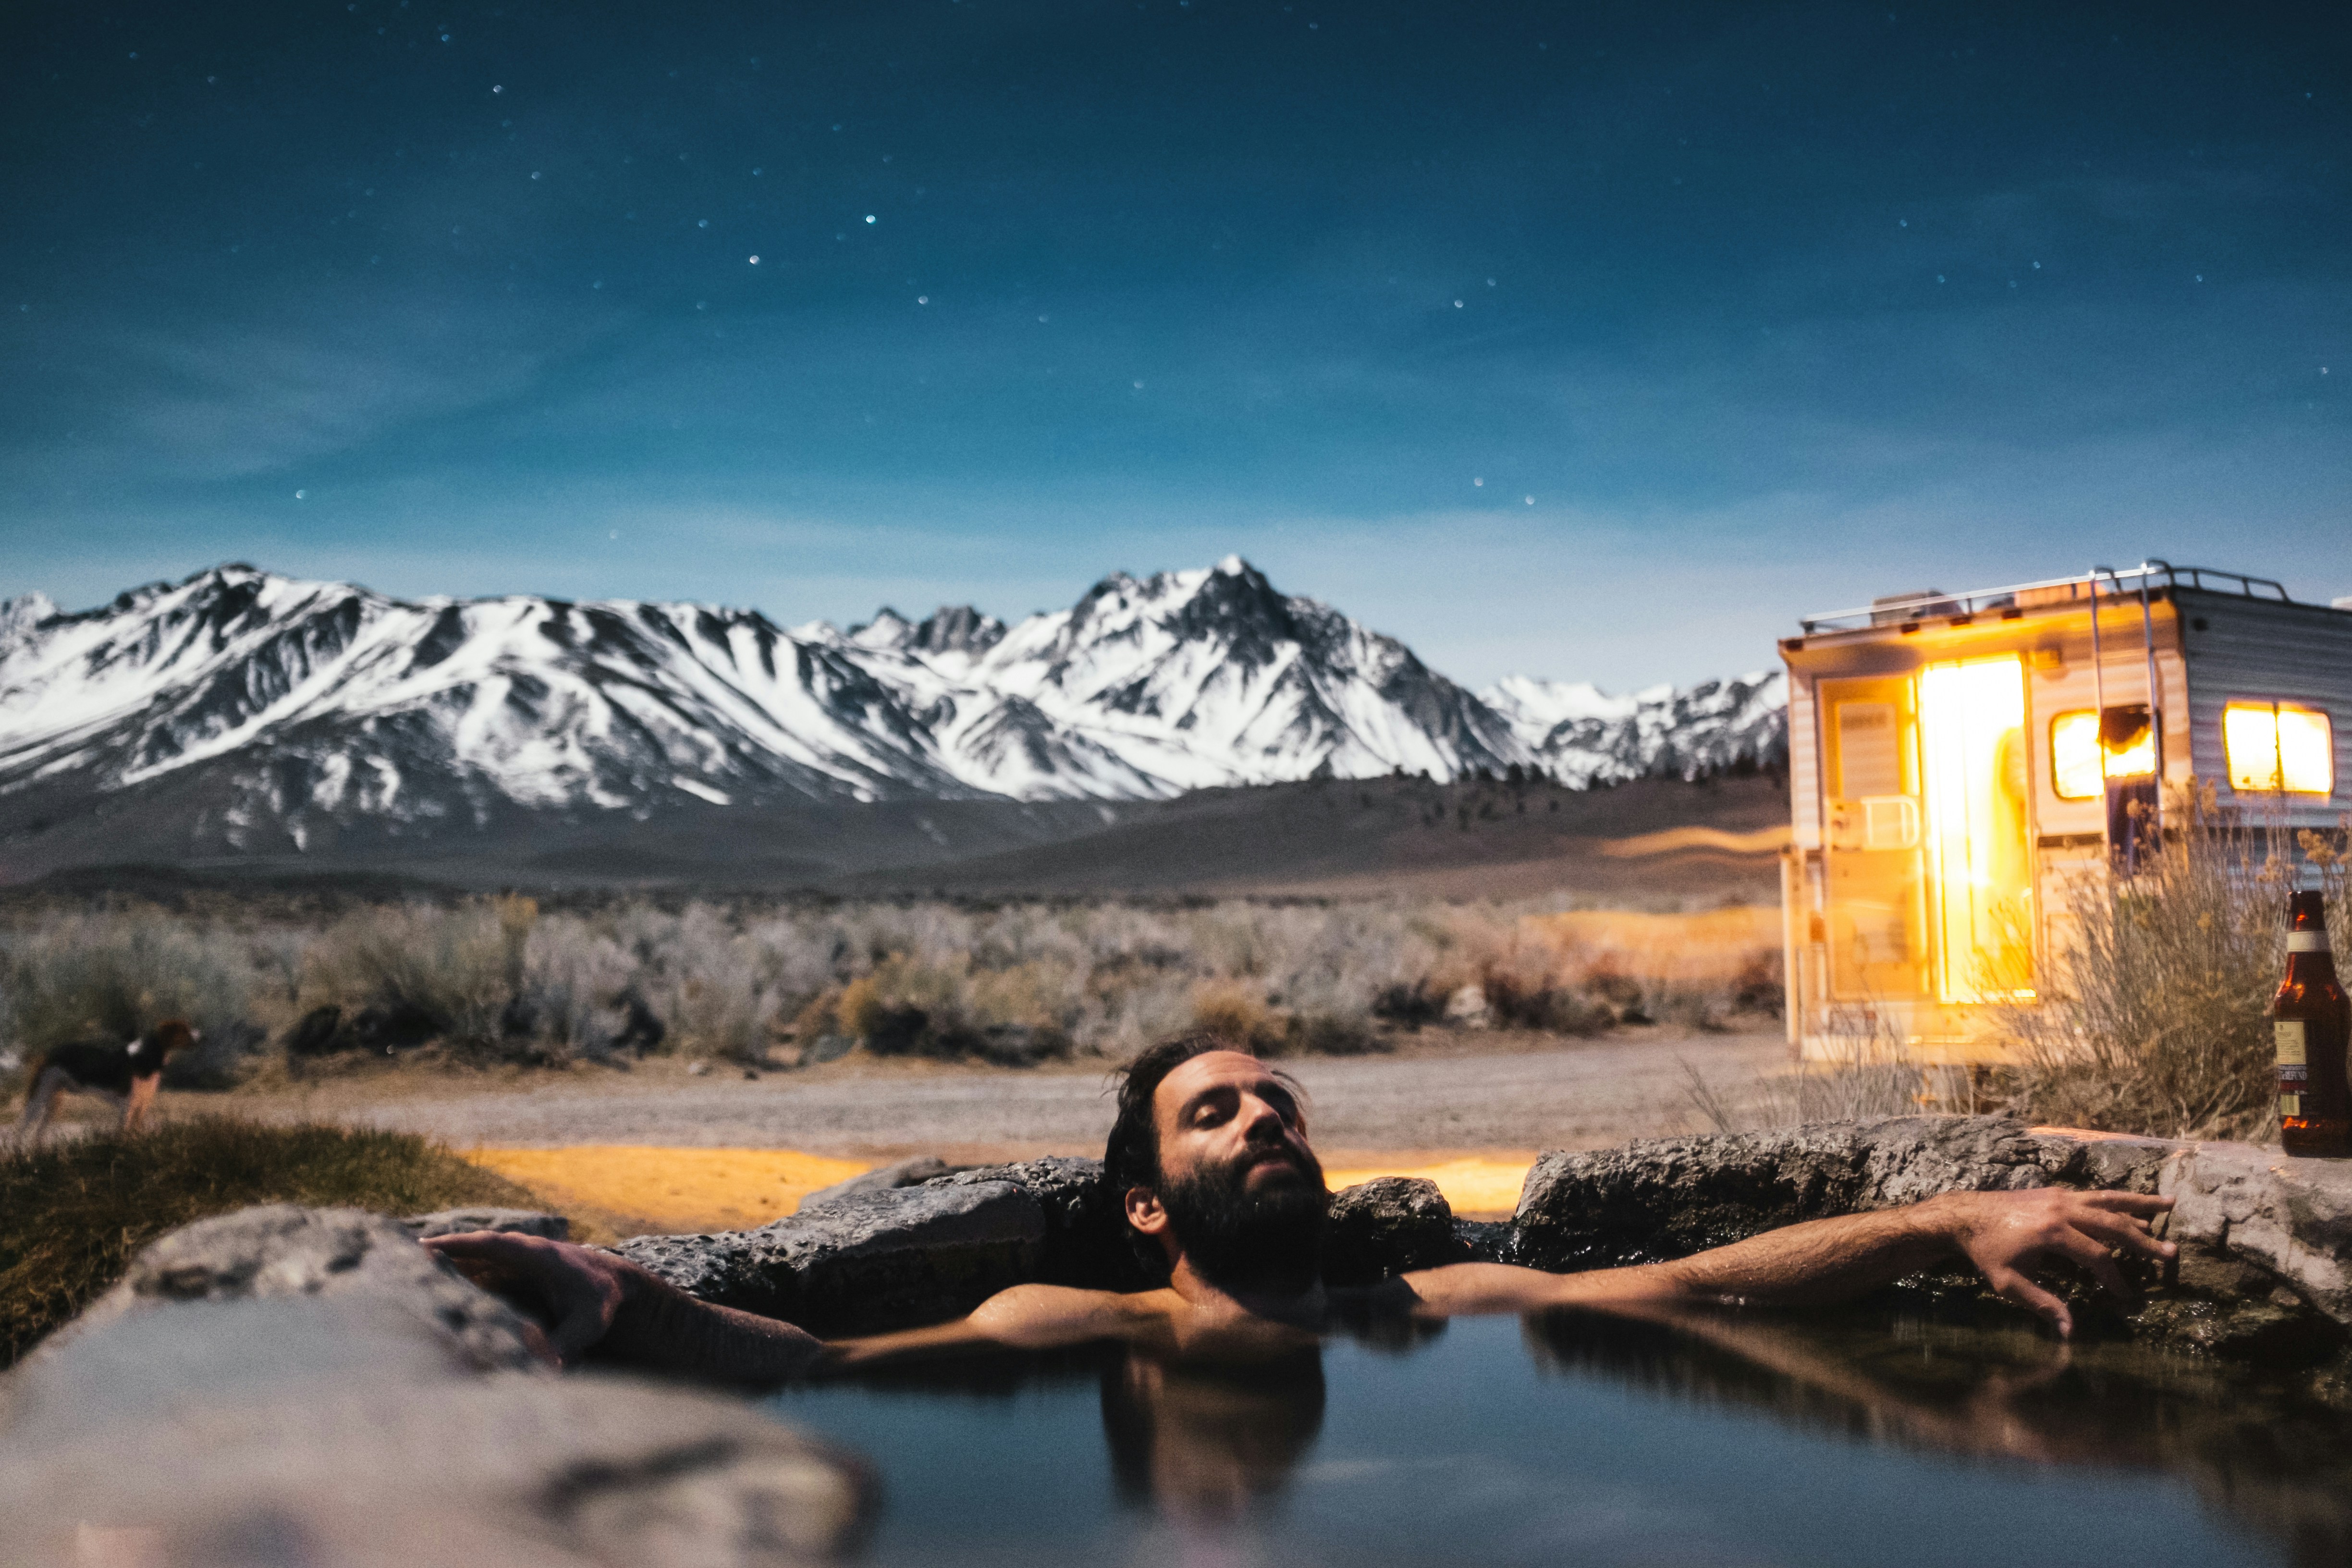 Hot stone bath in the mountains